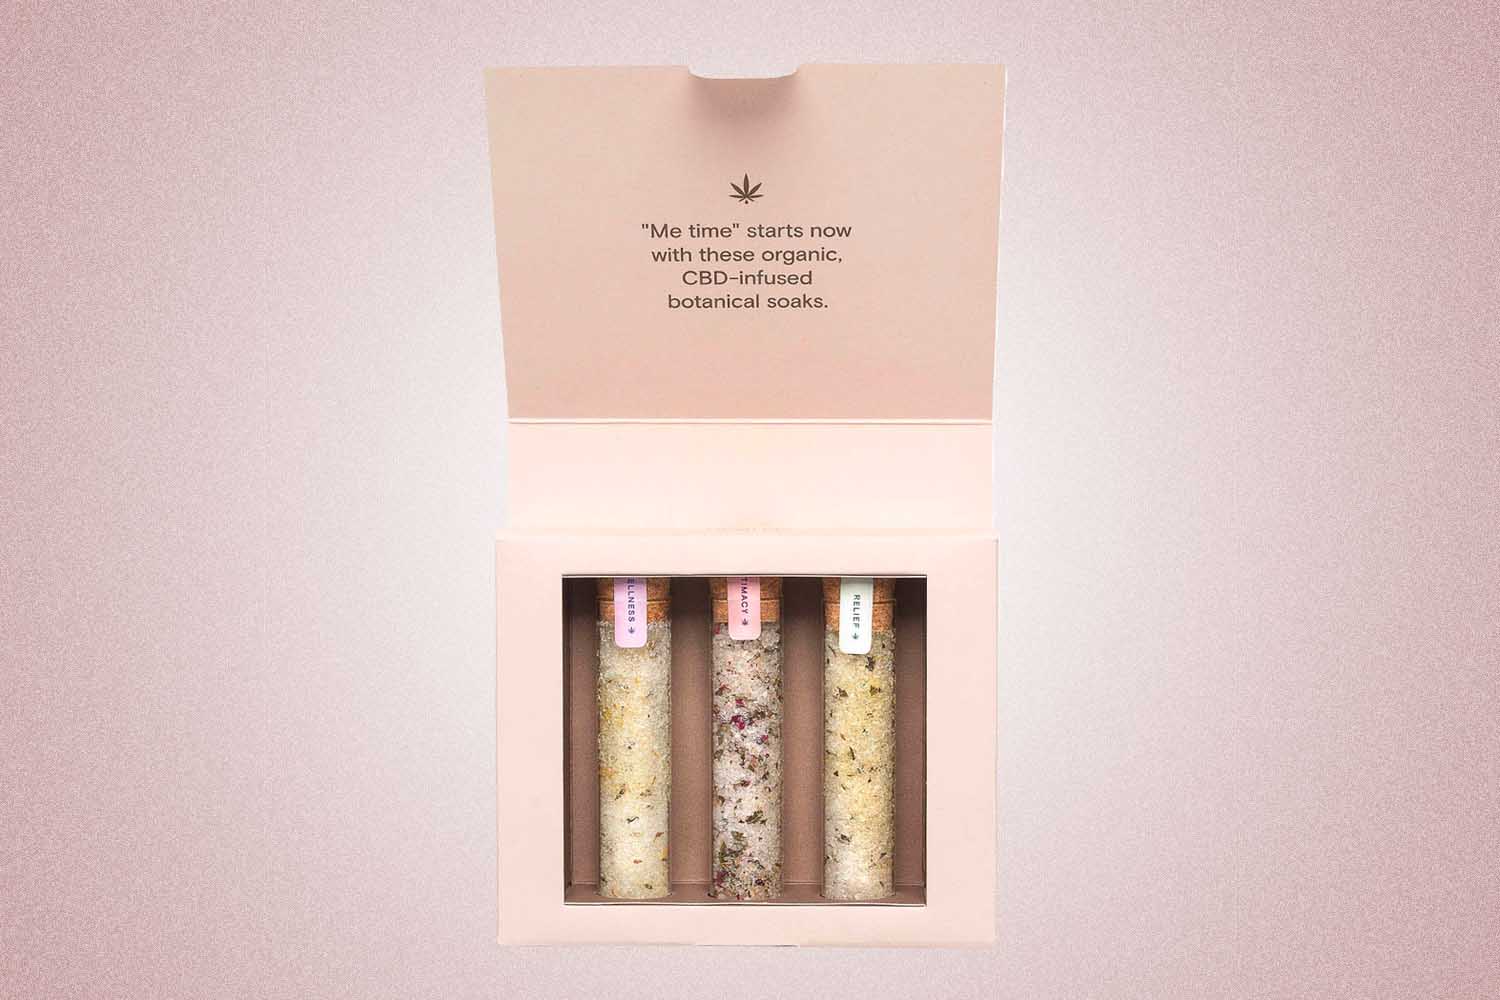 A trio of CBD bathsalts from Foria, a perfect Valentine’s Day gift for 2022, on a pink background.